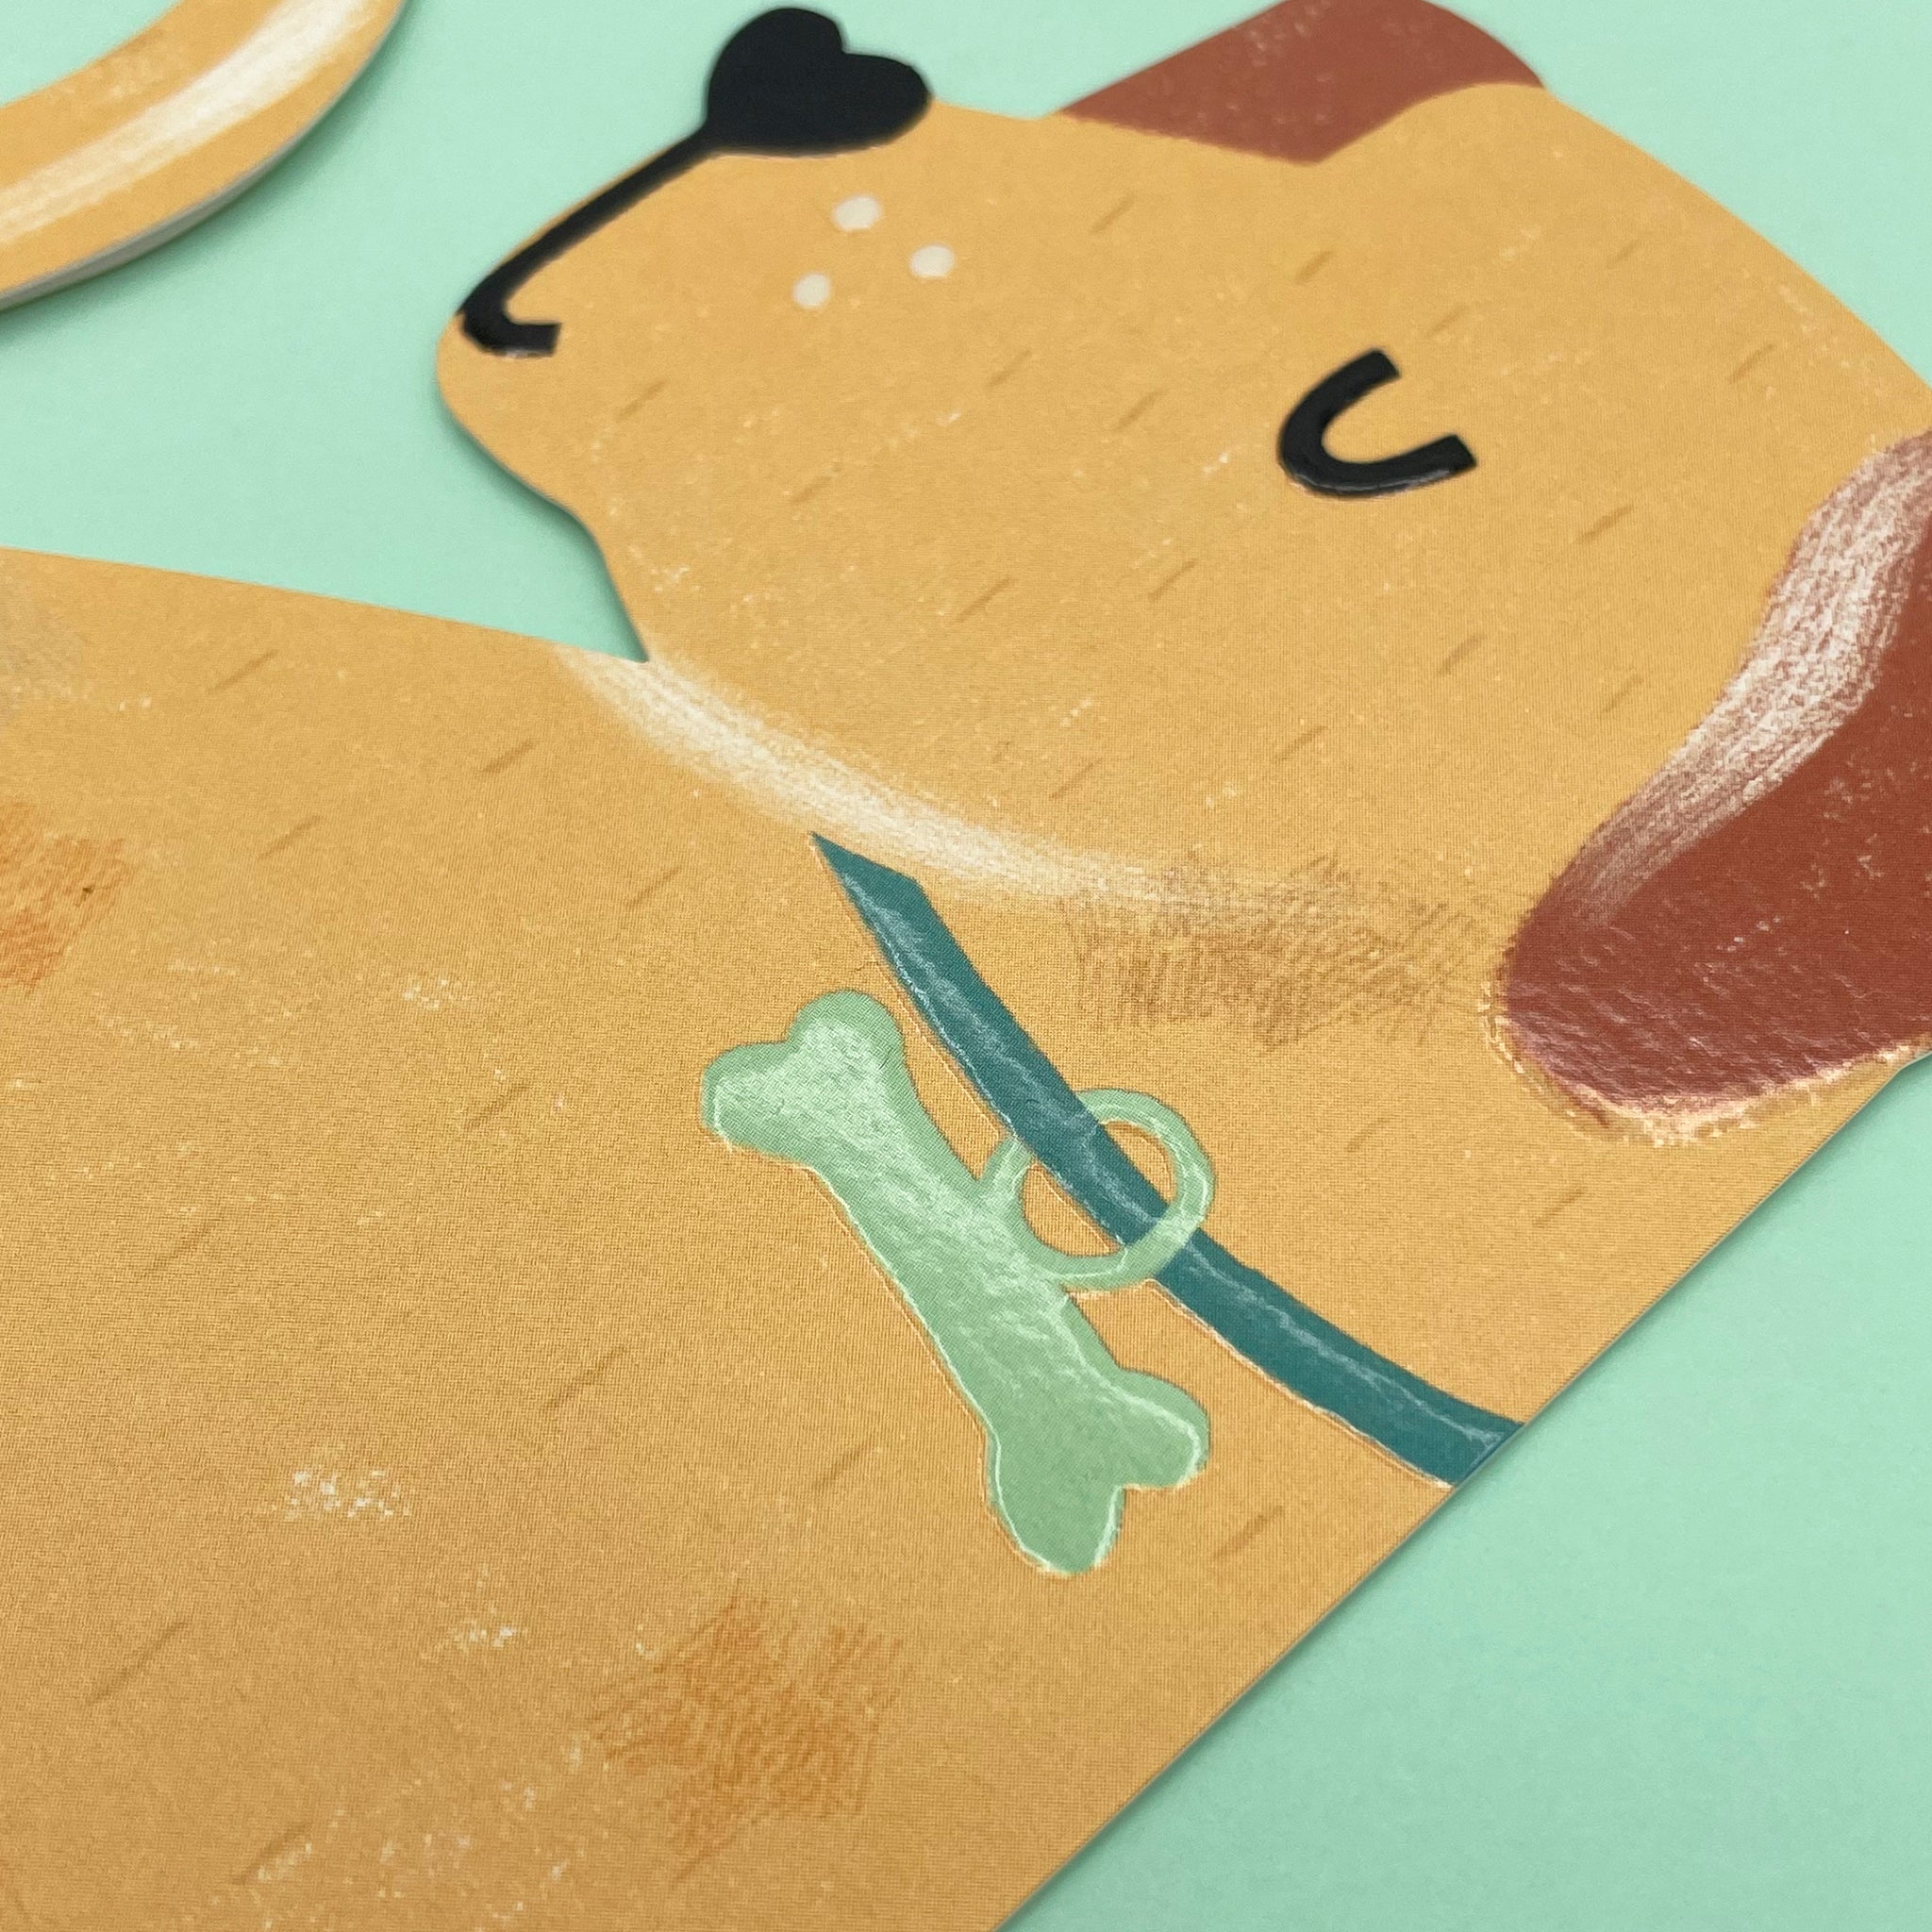 A close up of the Labrador cut out card on a mint coloured envelope.